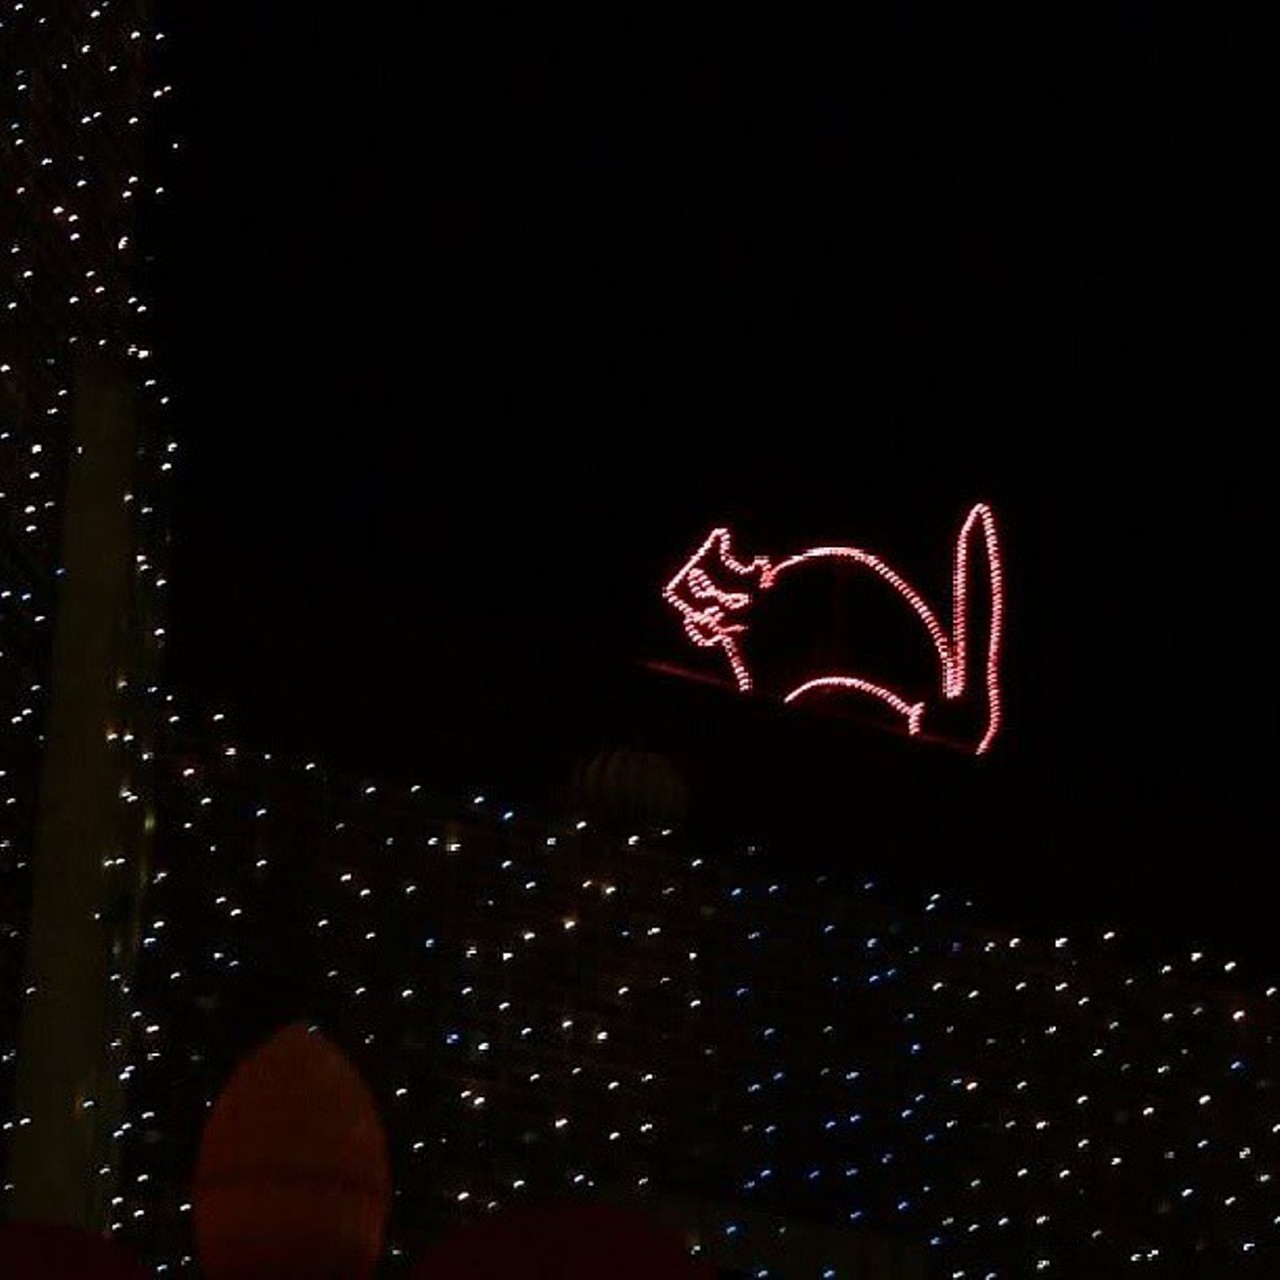 During the annual Osborne Family Spectacle of Dancing Lights at Disney's Hollywood Studios, Disney always hides a black cat for guests to find, as well as 50 hidden Mickeys.